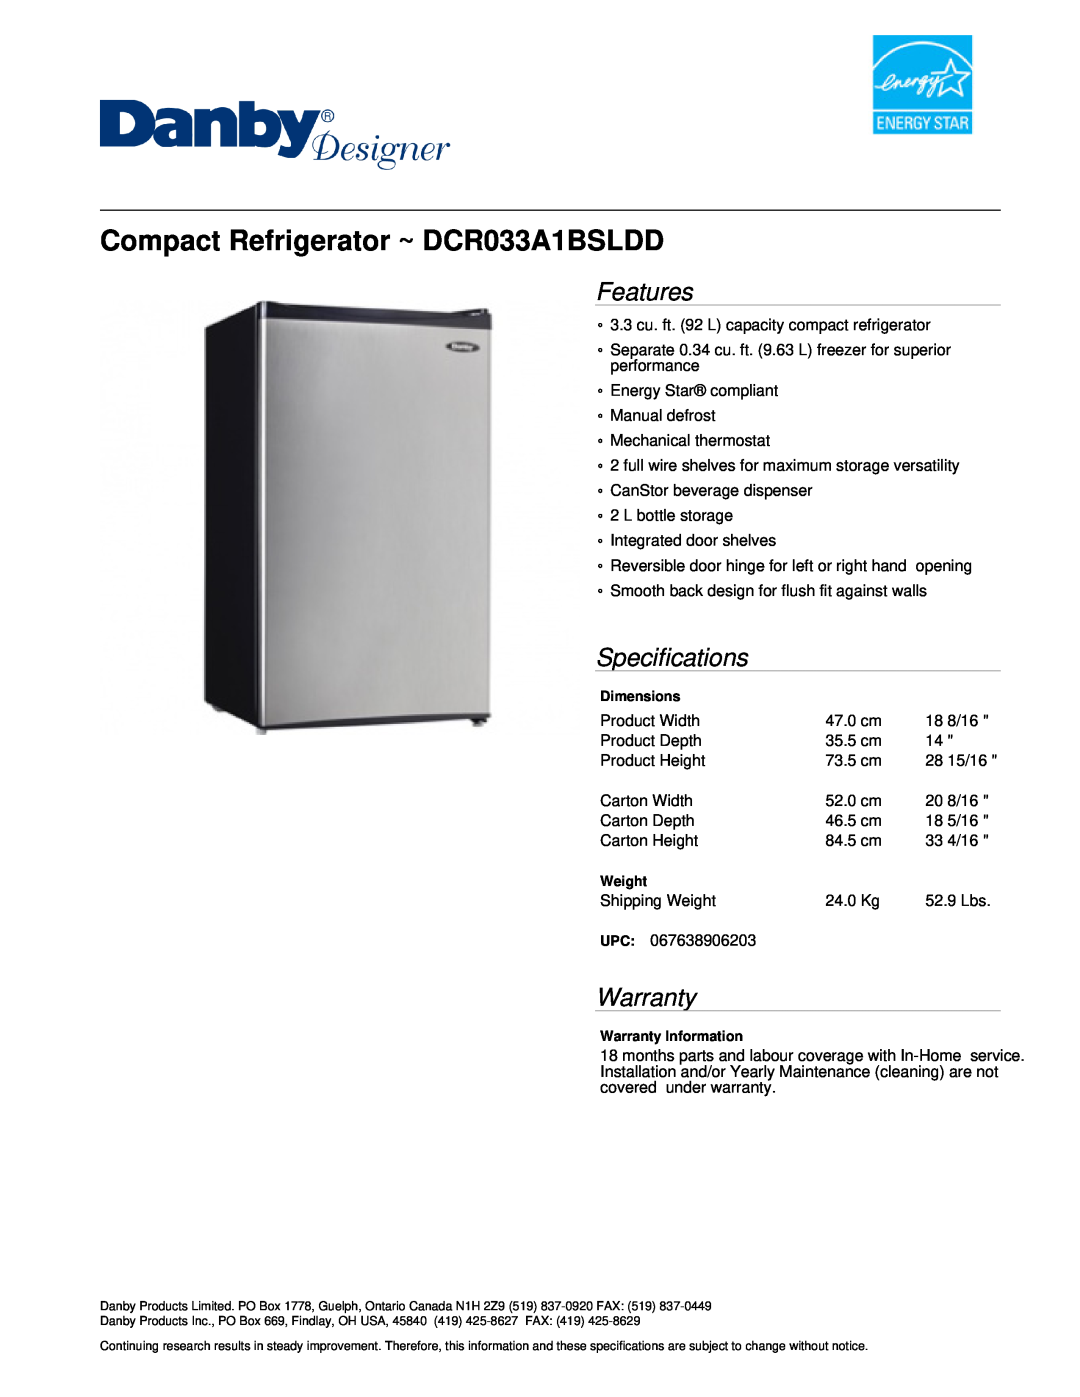 Danby specifications Compact Refrigerator ~ DCR033A1BSLDD, Features, Specifications, Warranty 